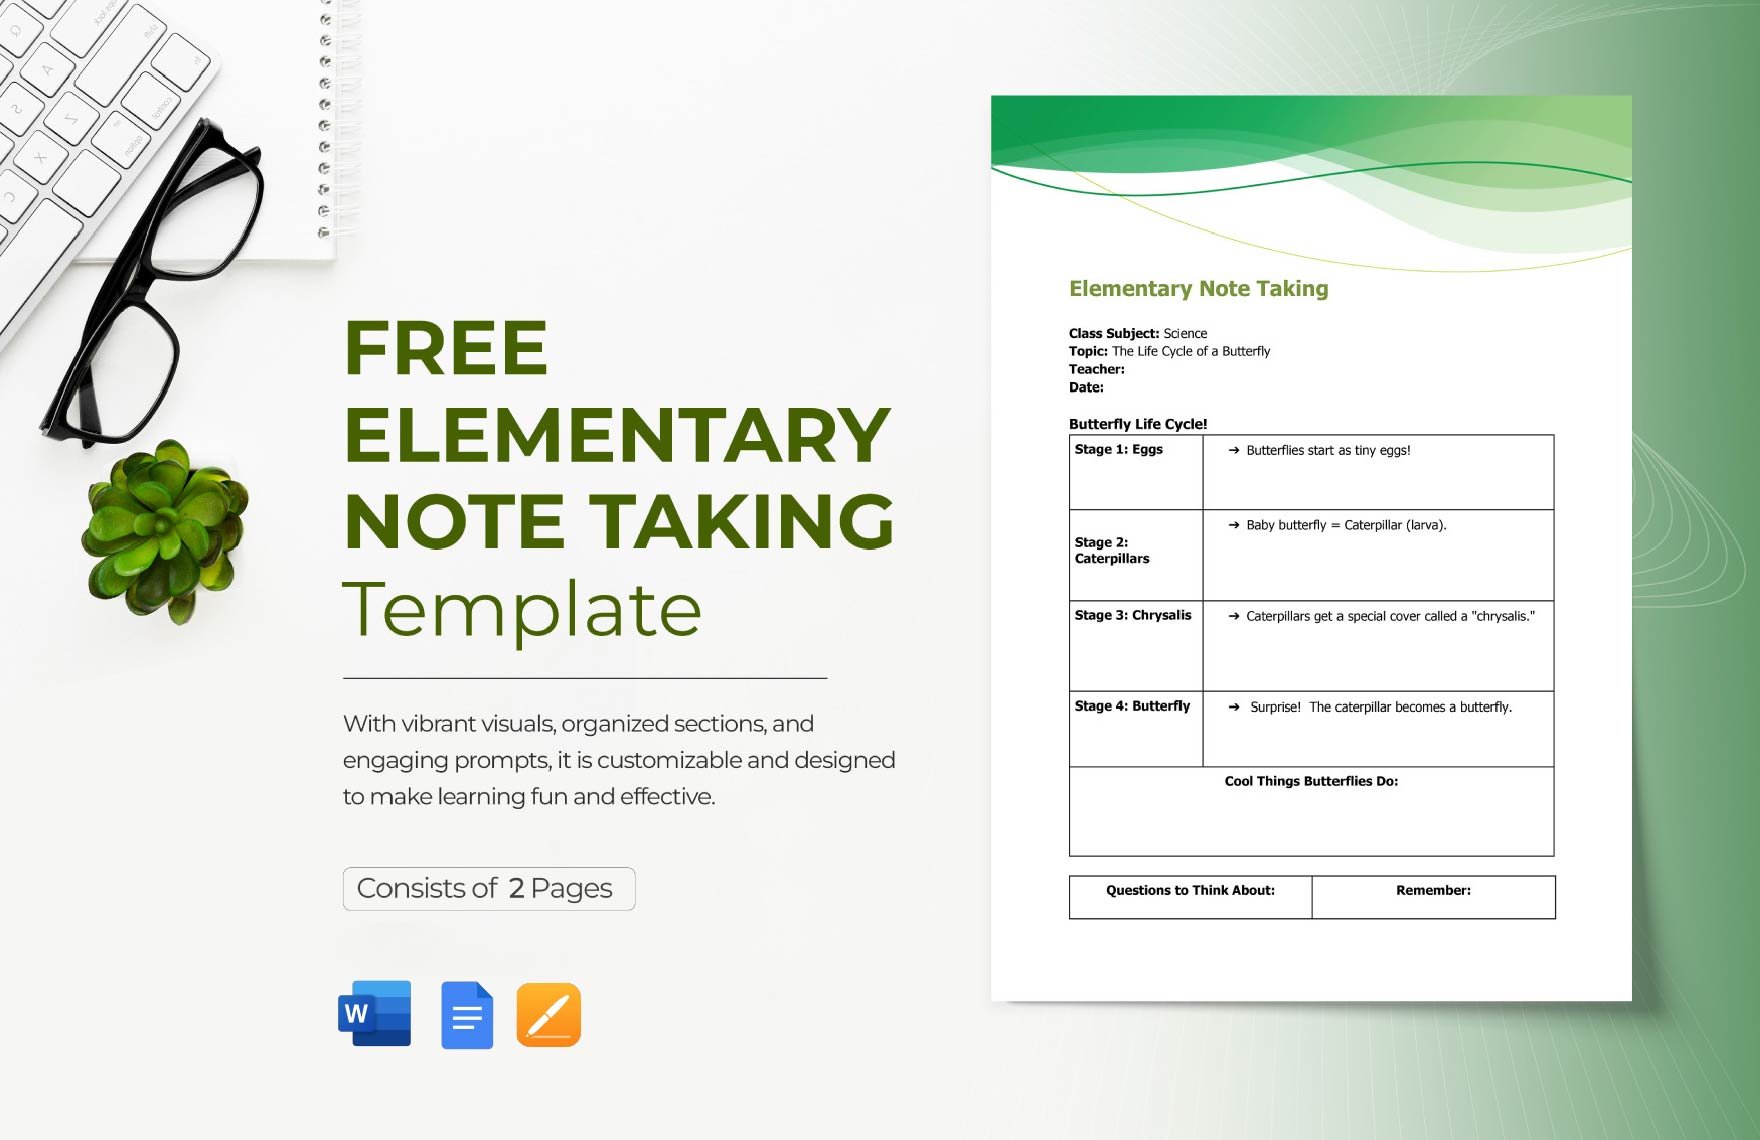 Free Elementary Note Taking Template in Word, Google Docs, PDF, Apple Pages